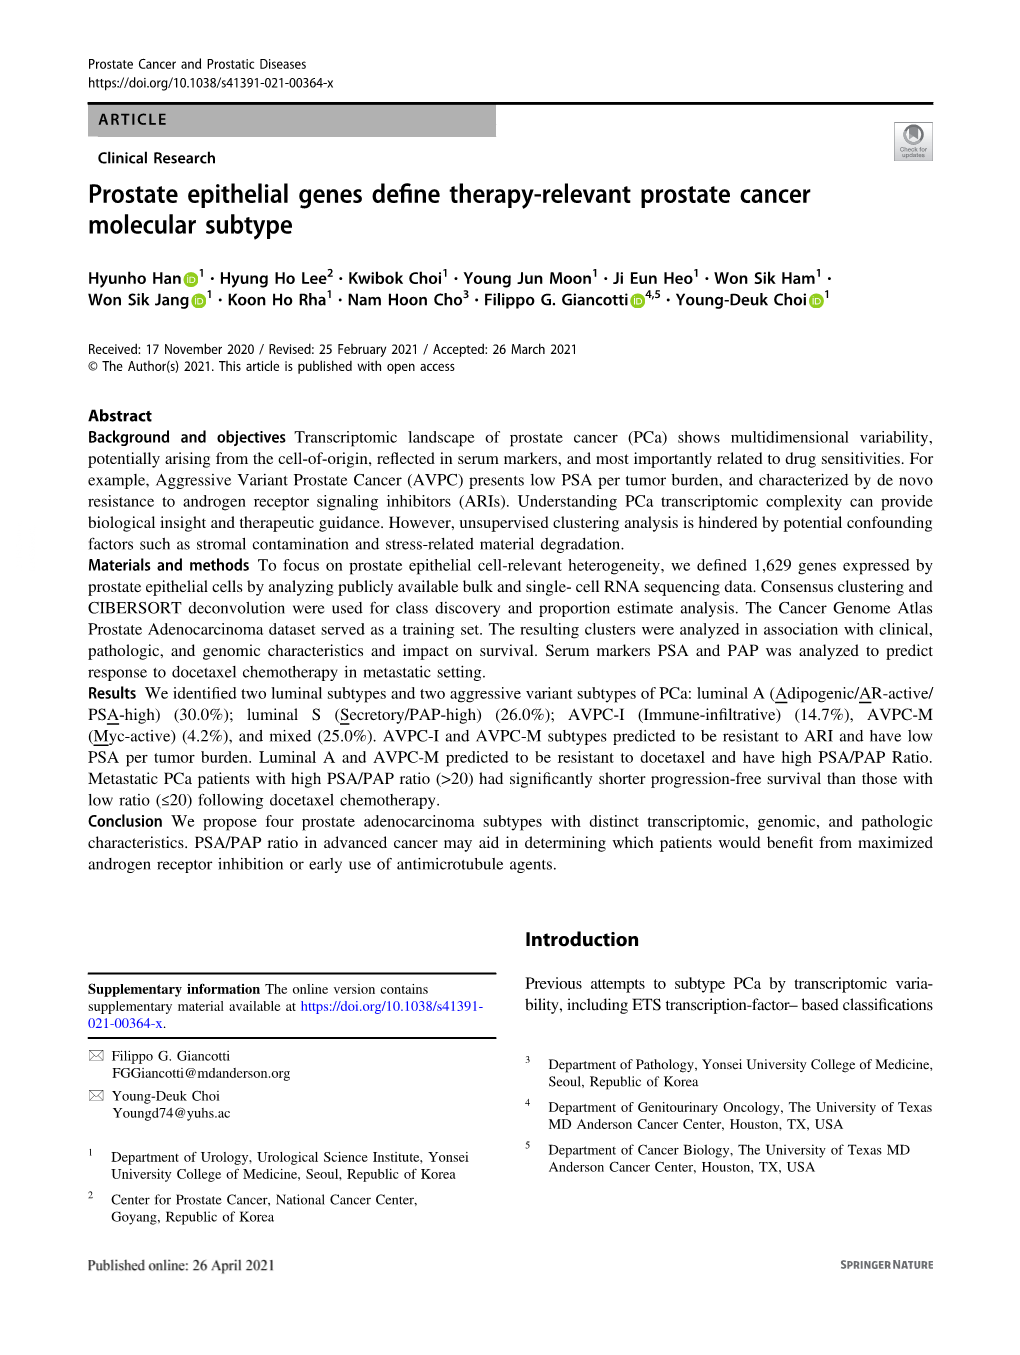 Prostate Epithelial Genes Define Therapy-Relevant Prostate Cancer